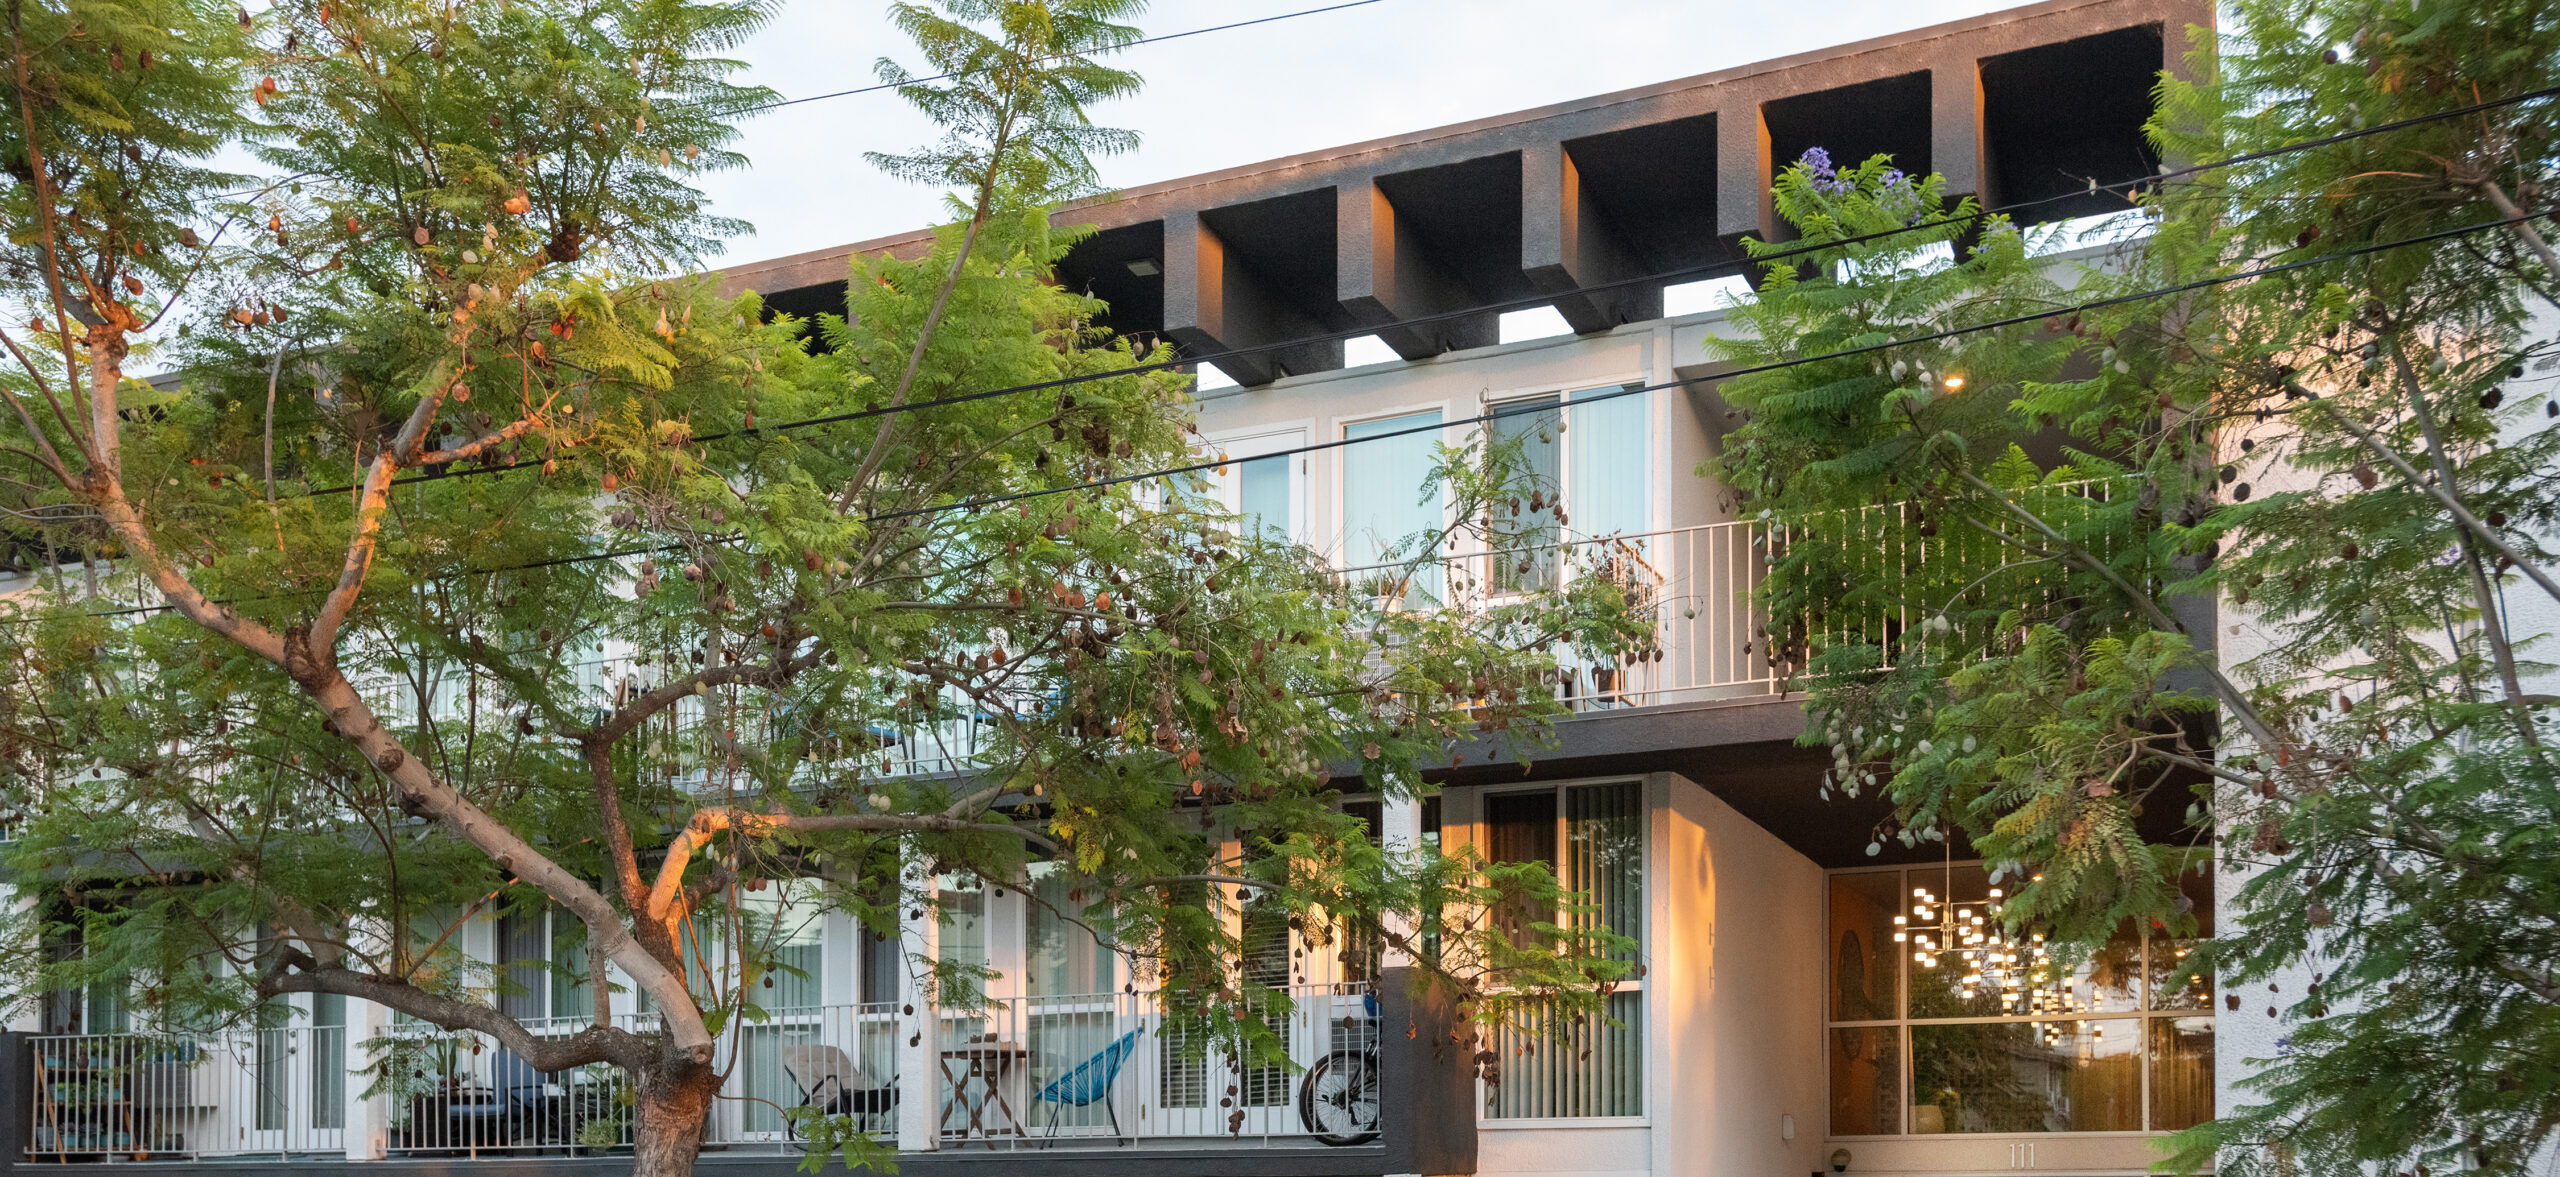 exterior facade of apartment building with trees